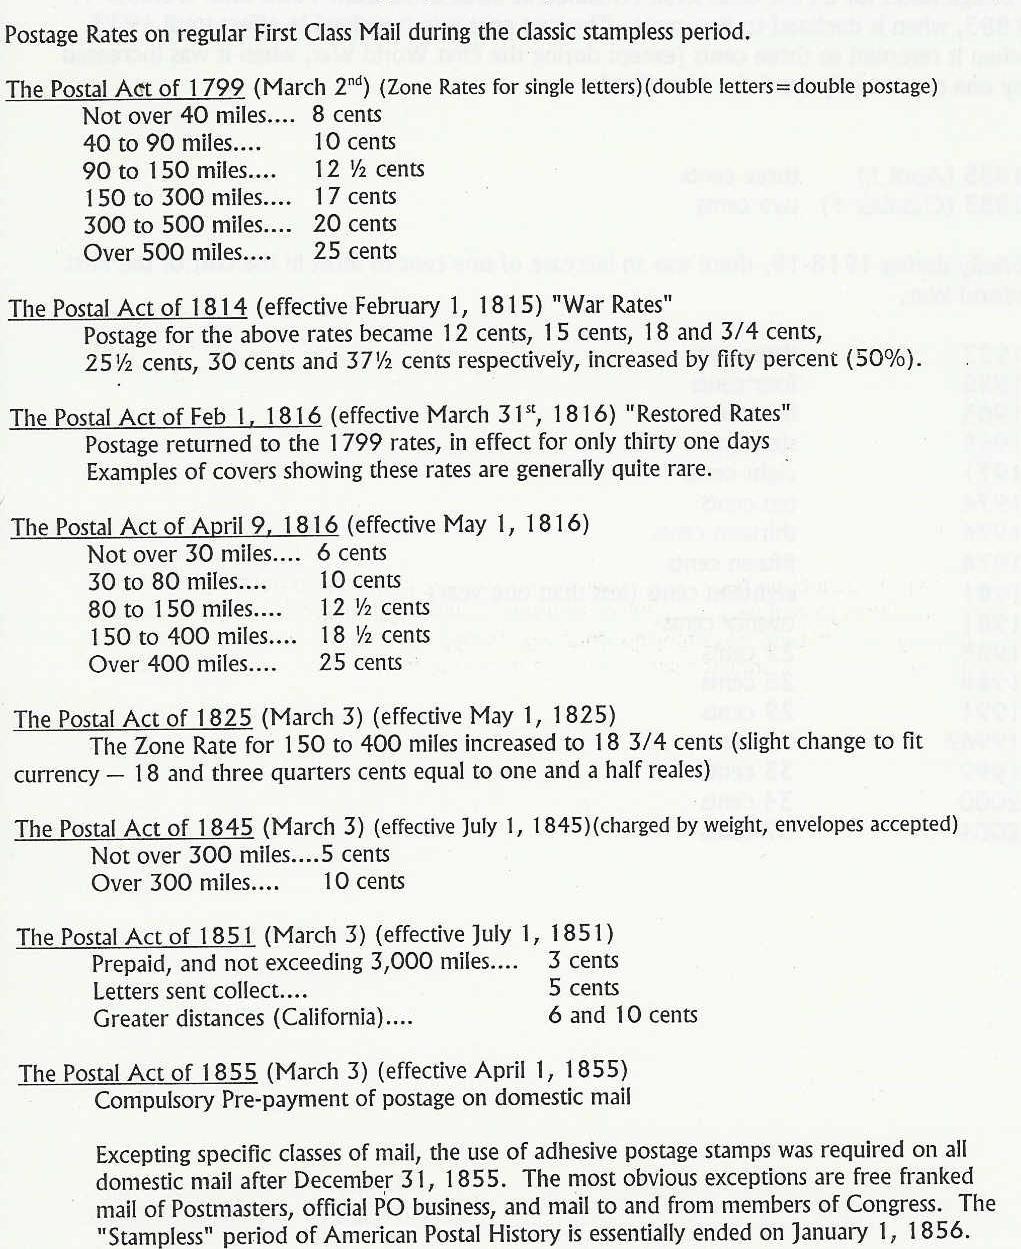 HISTORY OF POSTAL RATES (FROM BILL